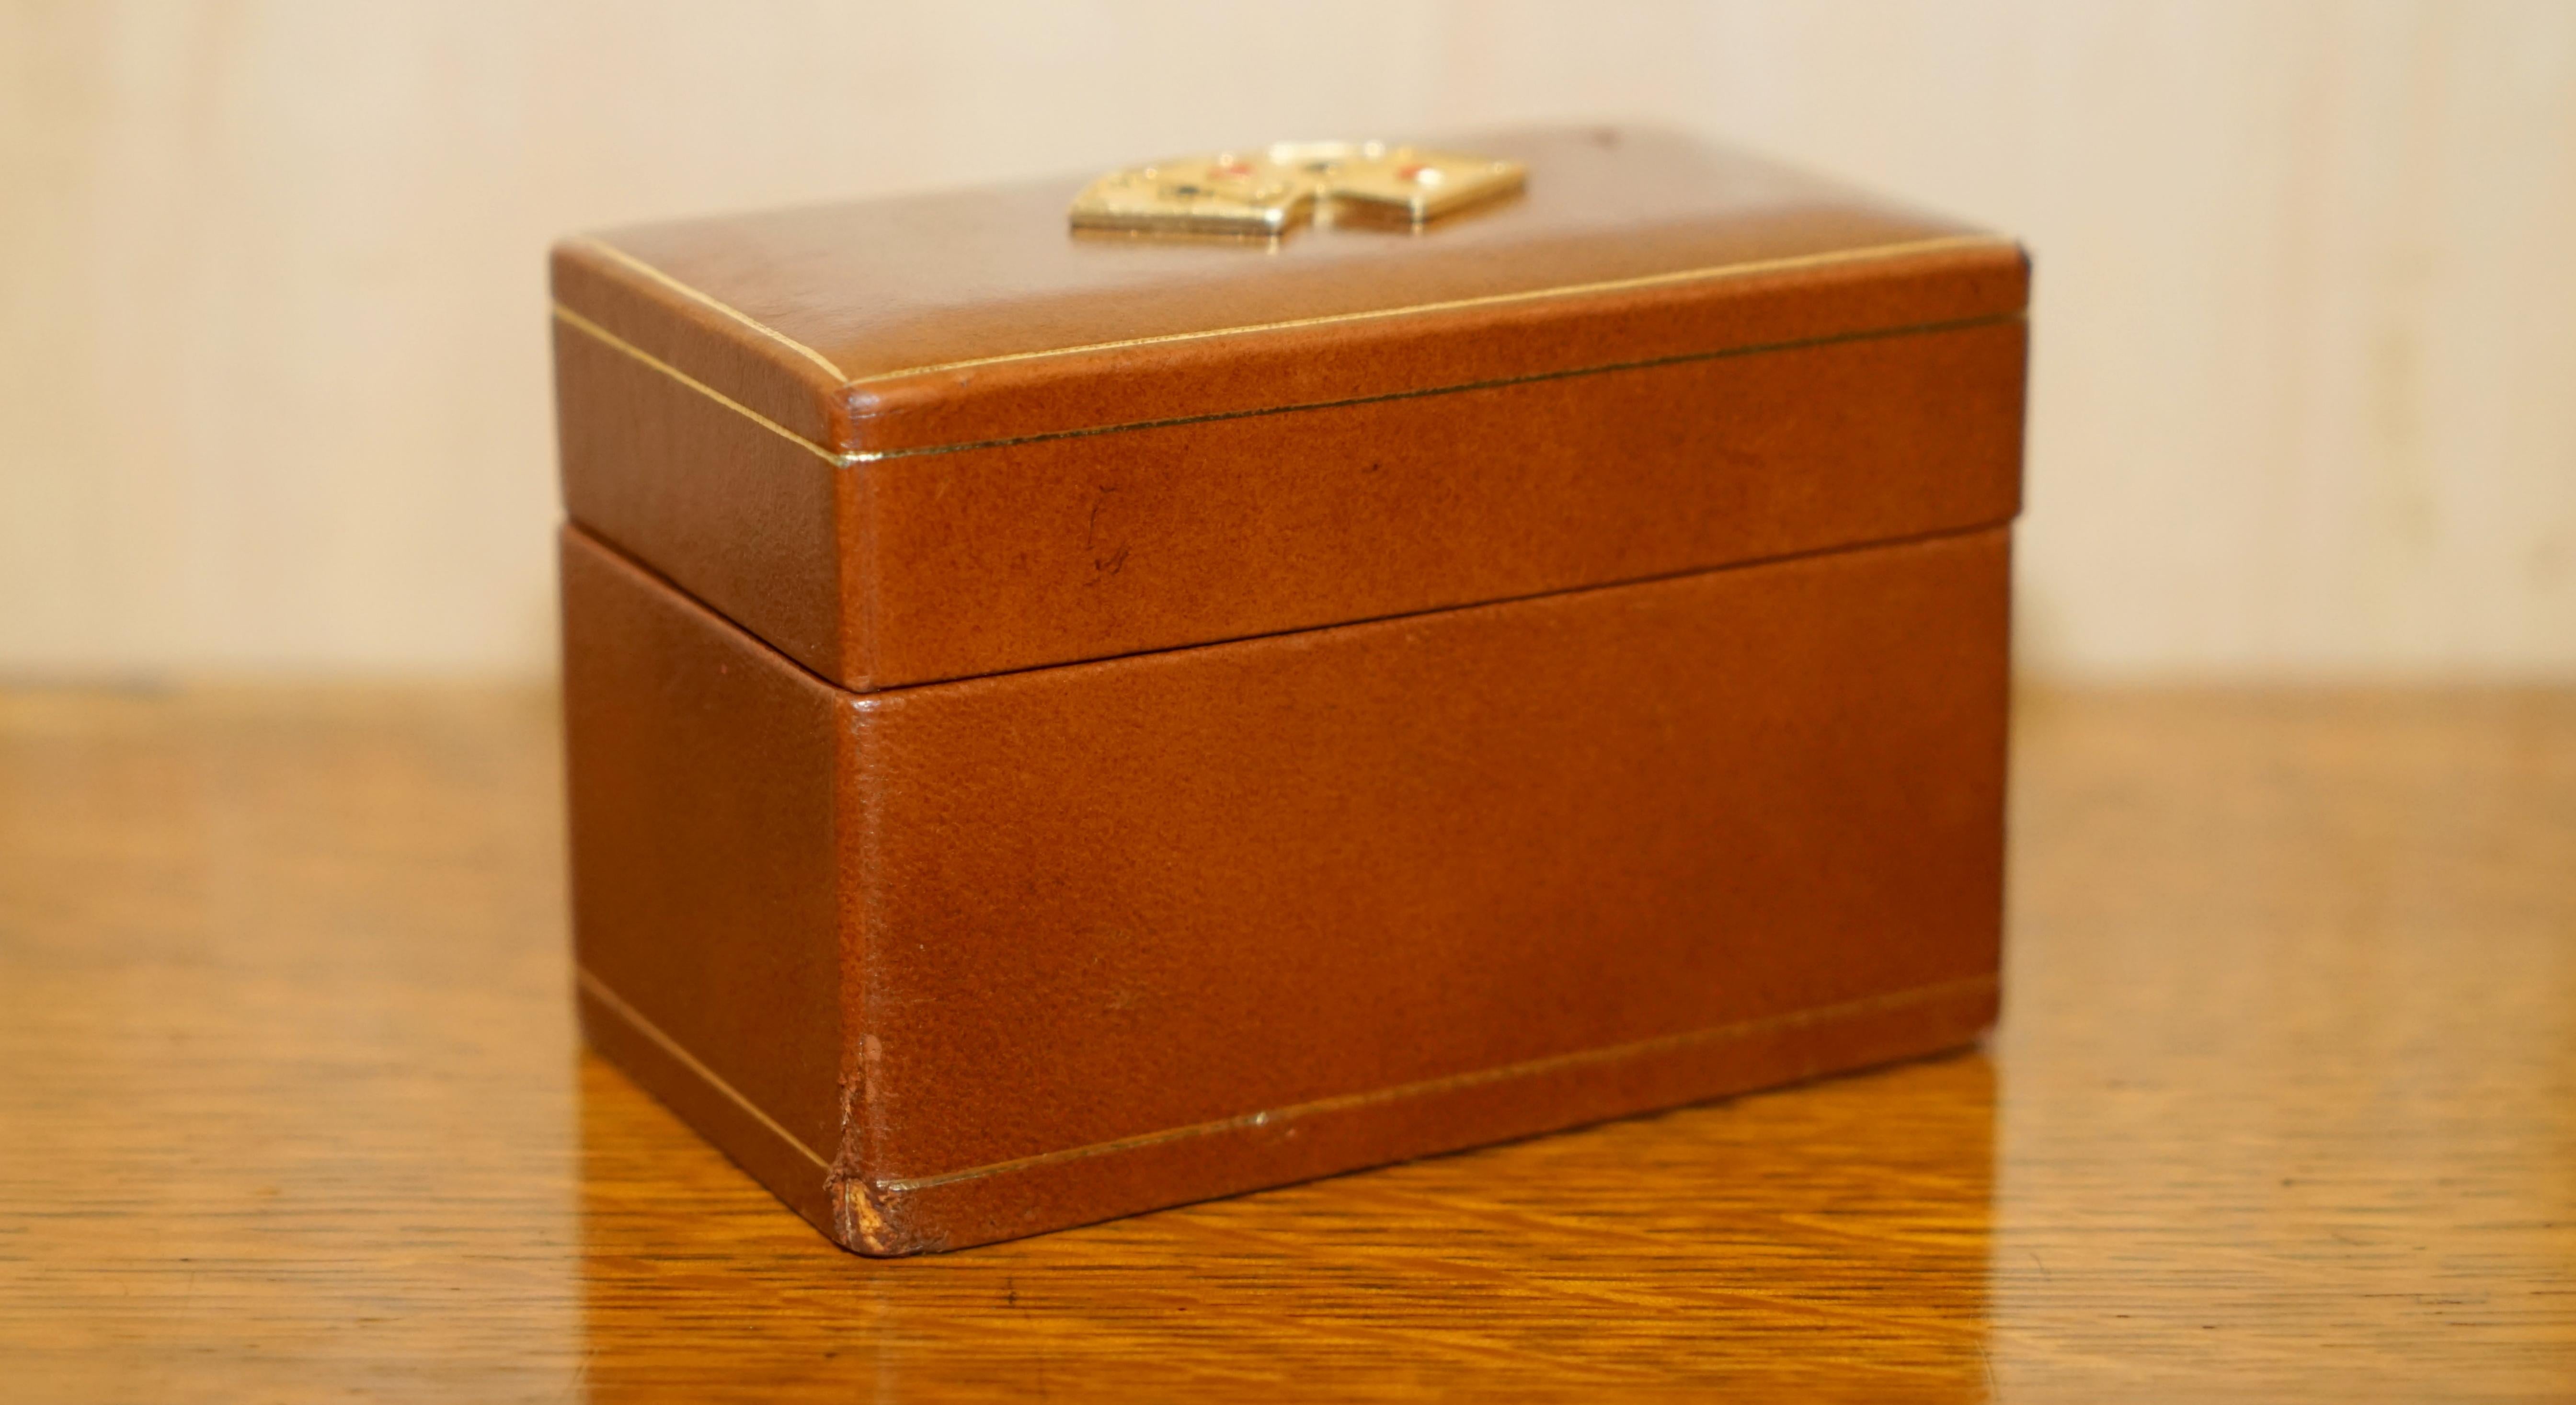 Royal House Antiques

Royal House Antiques is delighted to offer for sale this very nice and highly collectable Art Deco brown leather card case with brass cards plaque to the top and original cards inside 

A very good looking and decorative little